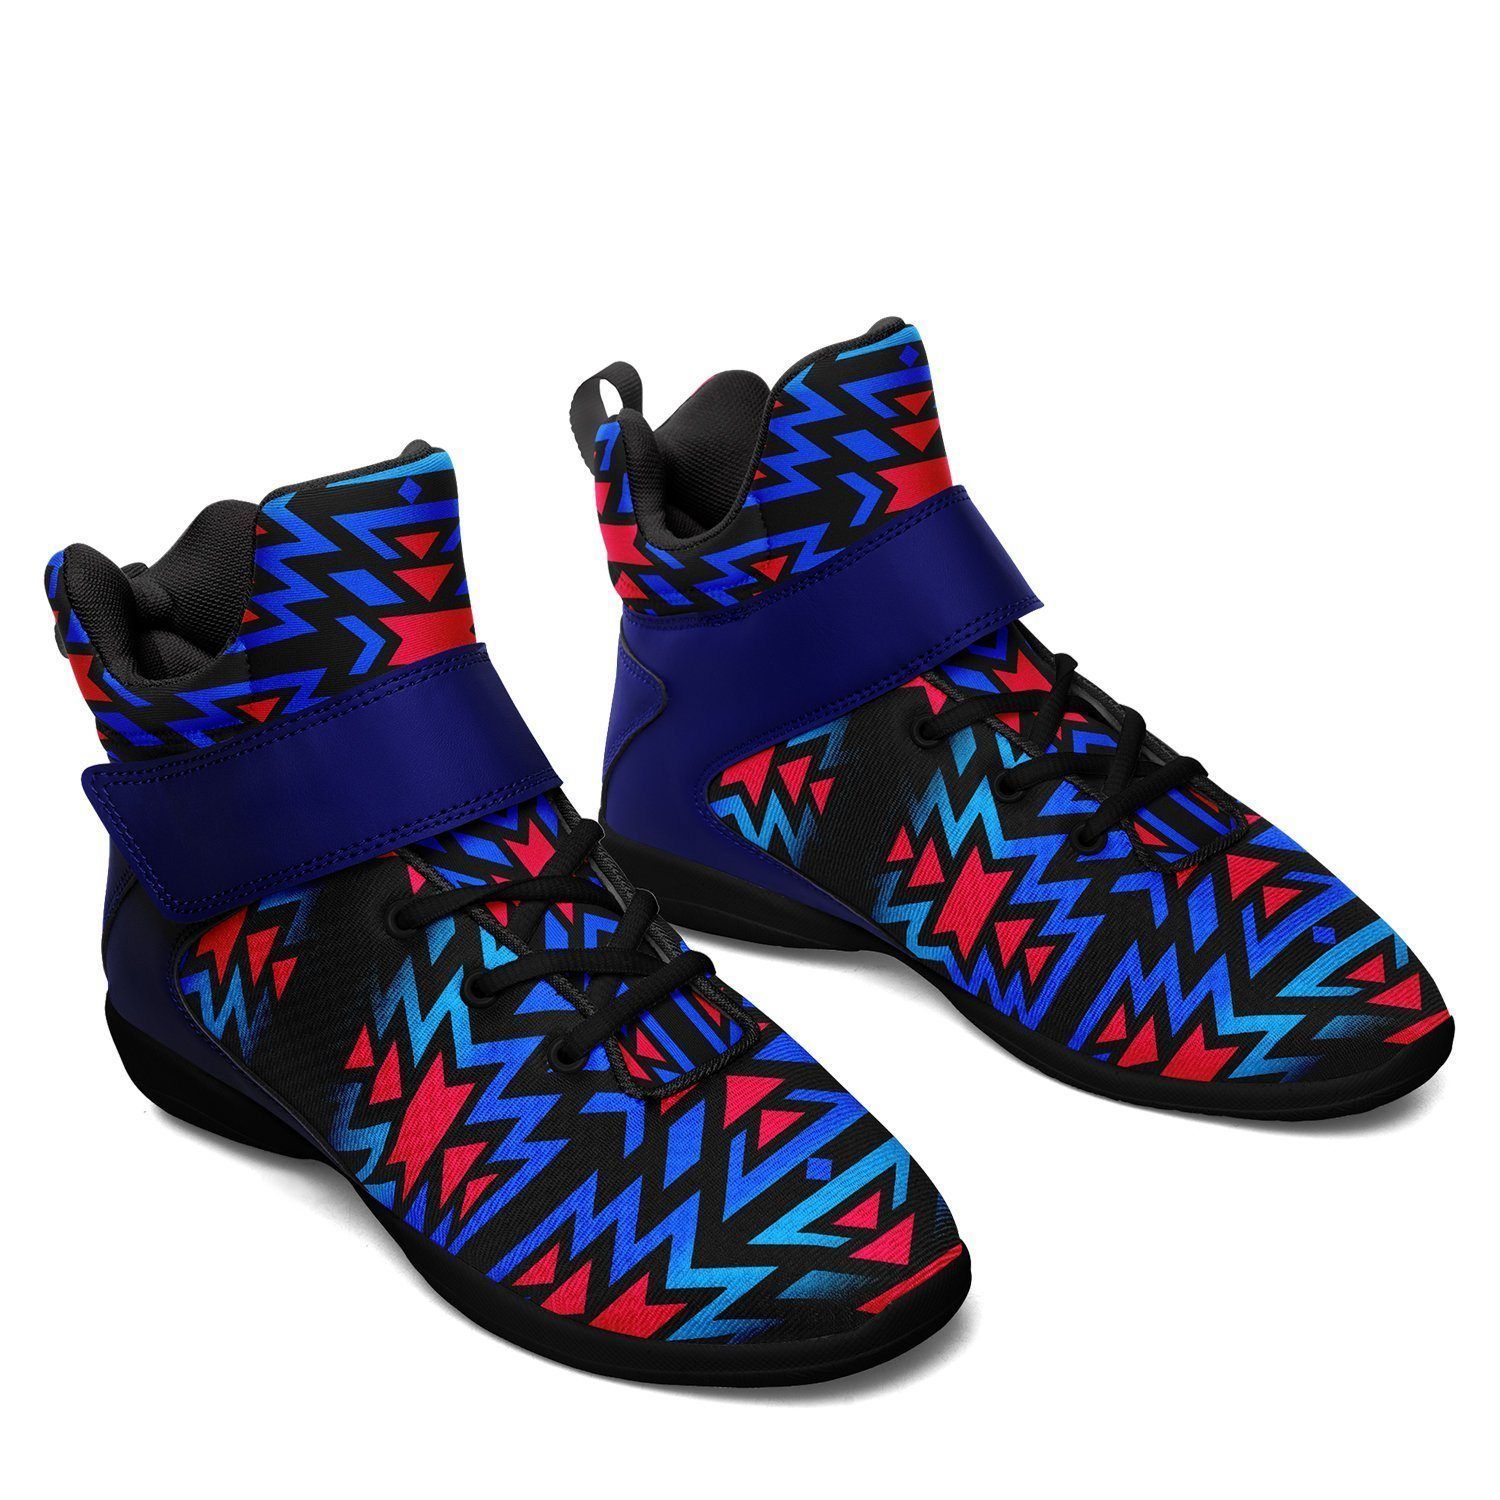 Black Fire Dragonfly Ipottaa Basketball / Sport High Top Shoes - Black Sole 49 Dzine 